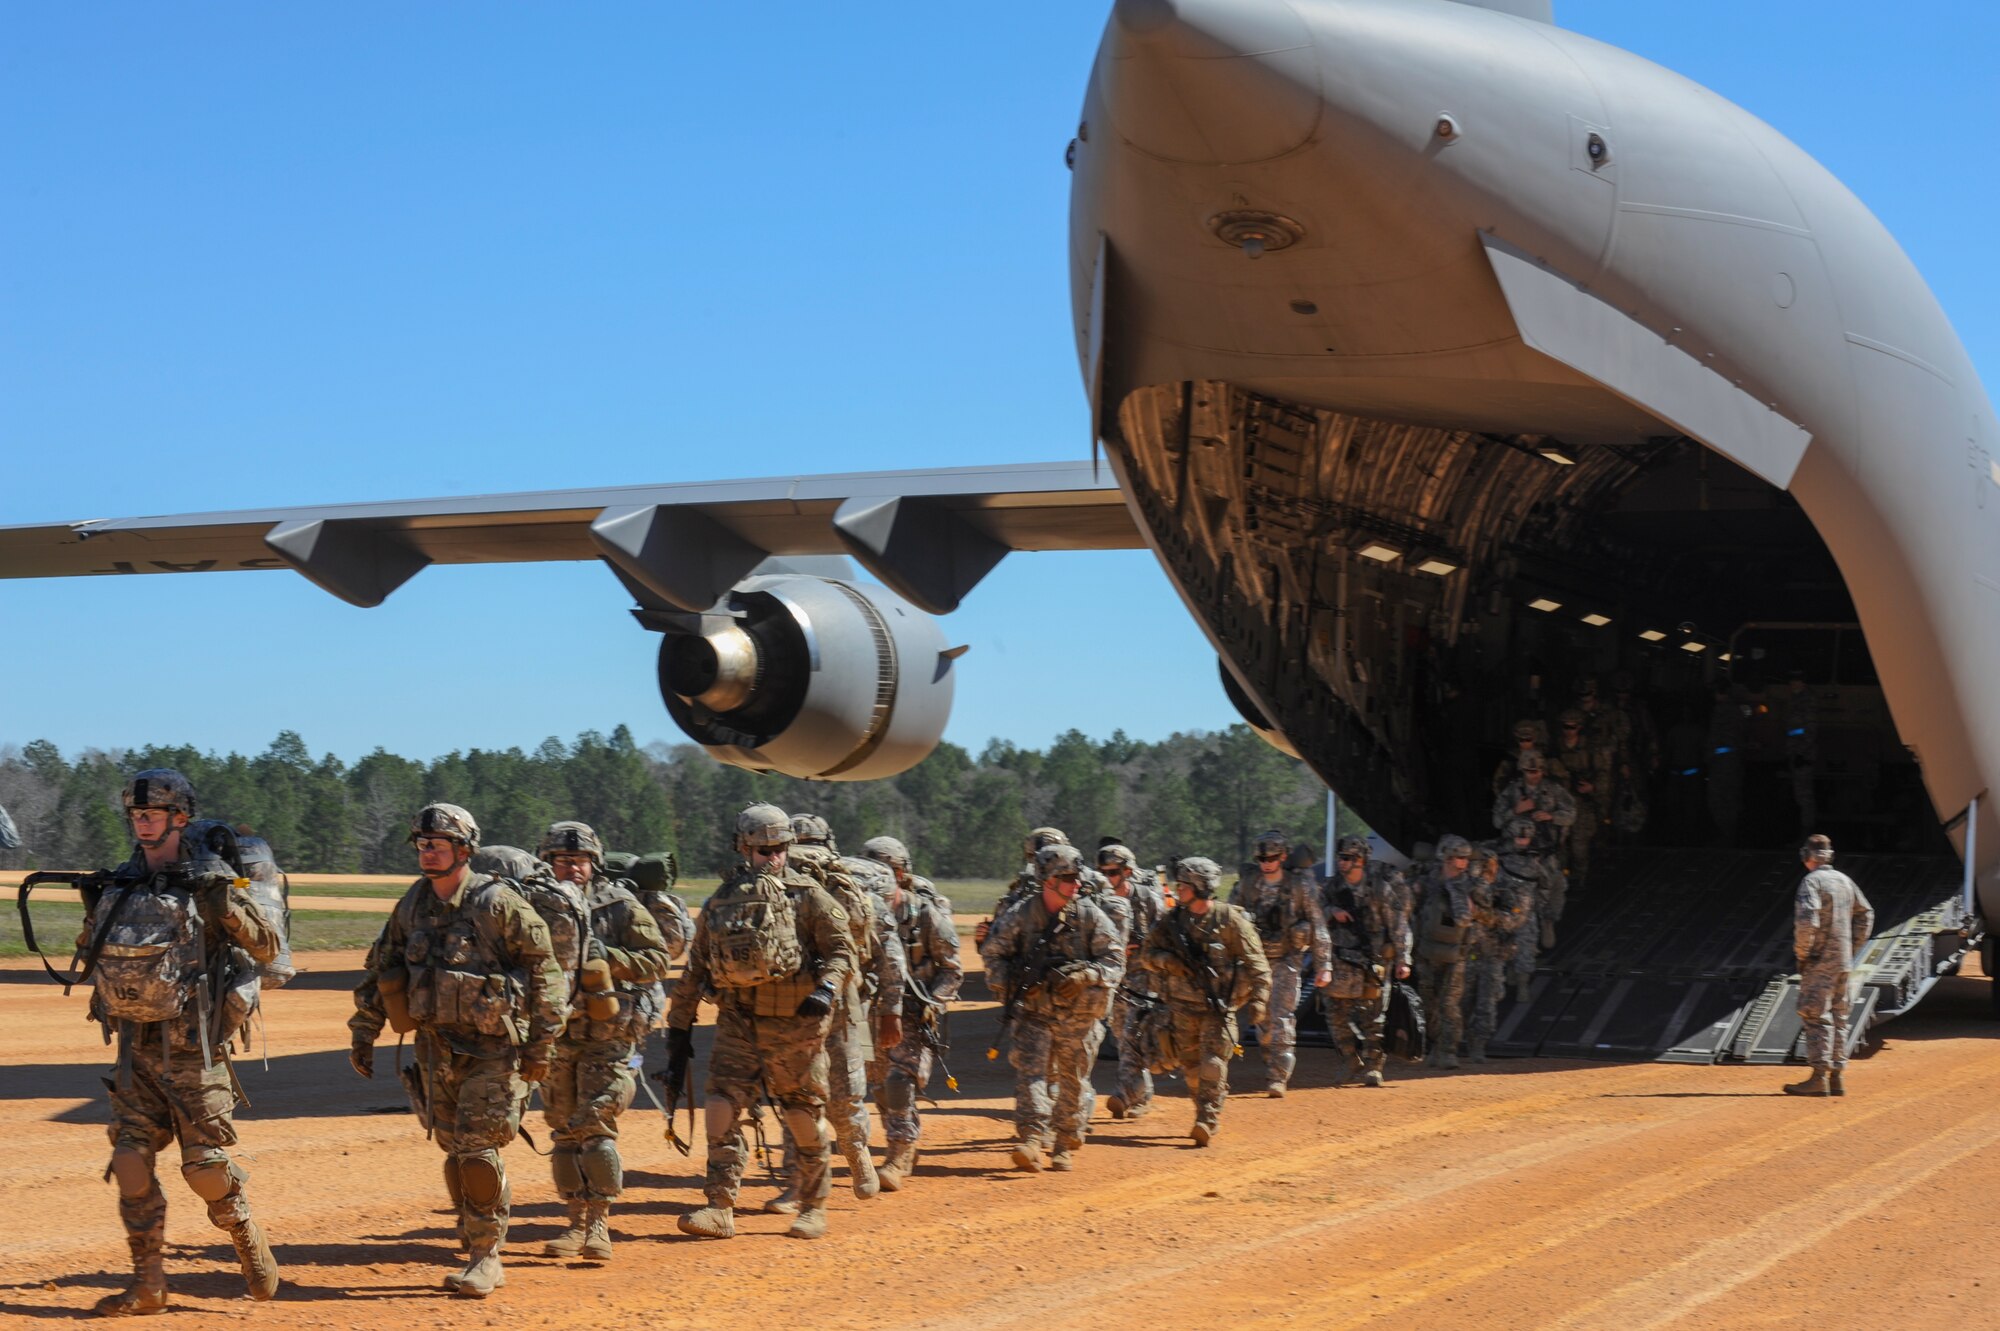 U.S. Army Soldiers depart from a C-17 Globemaster during GREEN FLAG 16-04, Feb. 17, 2016, at the Geronimo Landing Zone on Fort Polk, La. Among the service-members playing their part in the massive exercise was a team of observers, coaches and trainers from various Air Mobility Command bases. (U.S. Air Force photo/Senior Airman Harry Brexel)